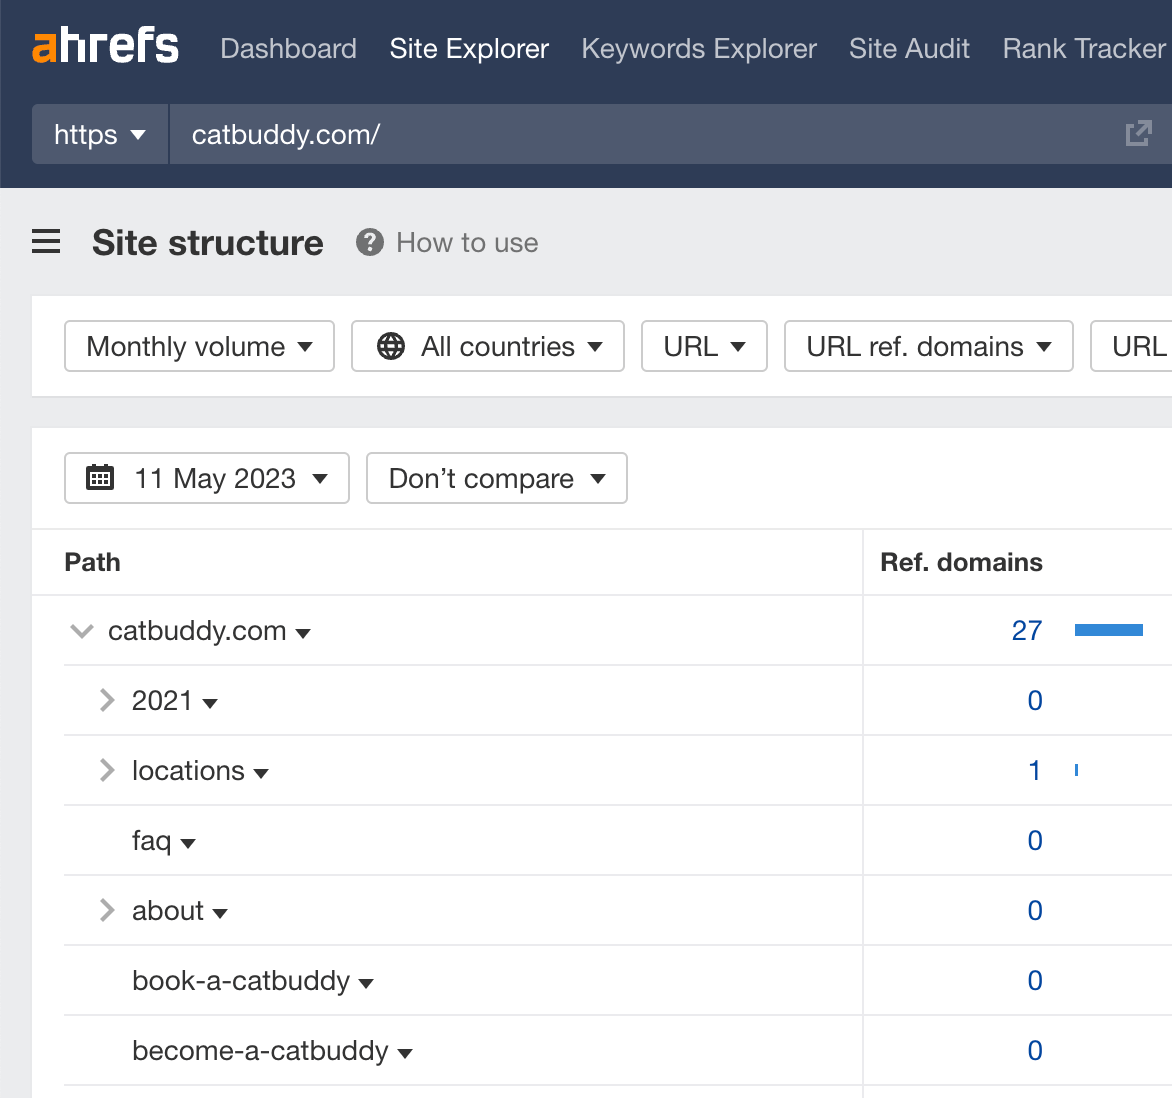 Example of spying on a competitor's site structure using Site Explorer, via Ahrefs' Site Explorer
